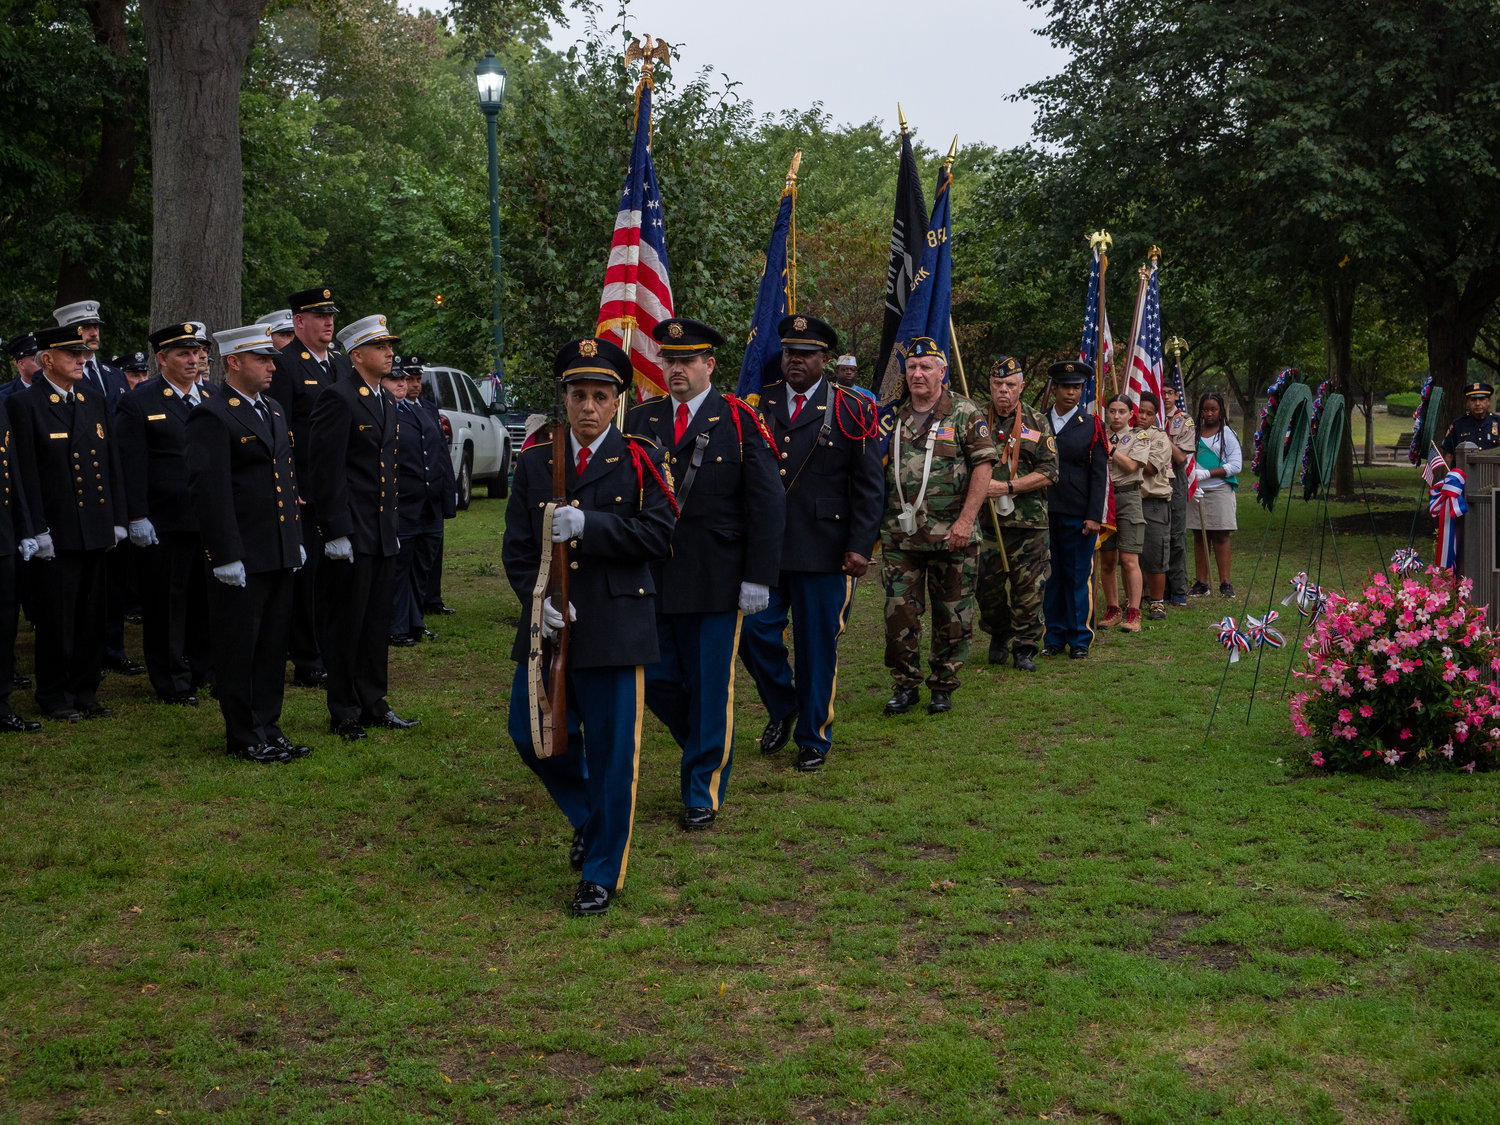 The village’s 9/11 annual remembrance ceremony began with the presentation of colors by members of the American Legion Post 854, Veterans of Foreign Wars Post 1700, the Valley Stream Boy and Girl Scouts, and the New York Naval Cadet Corp.